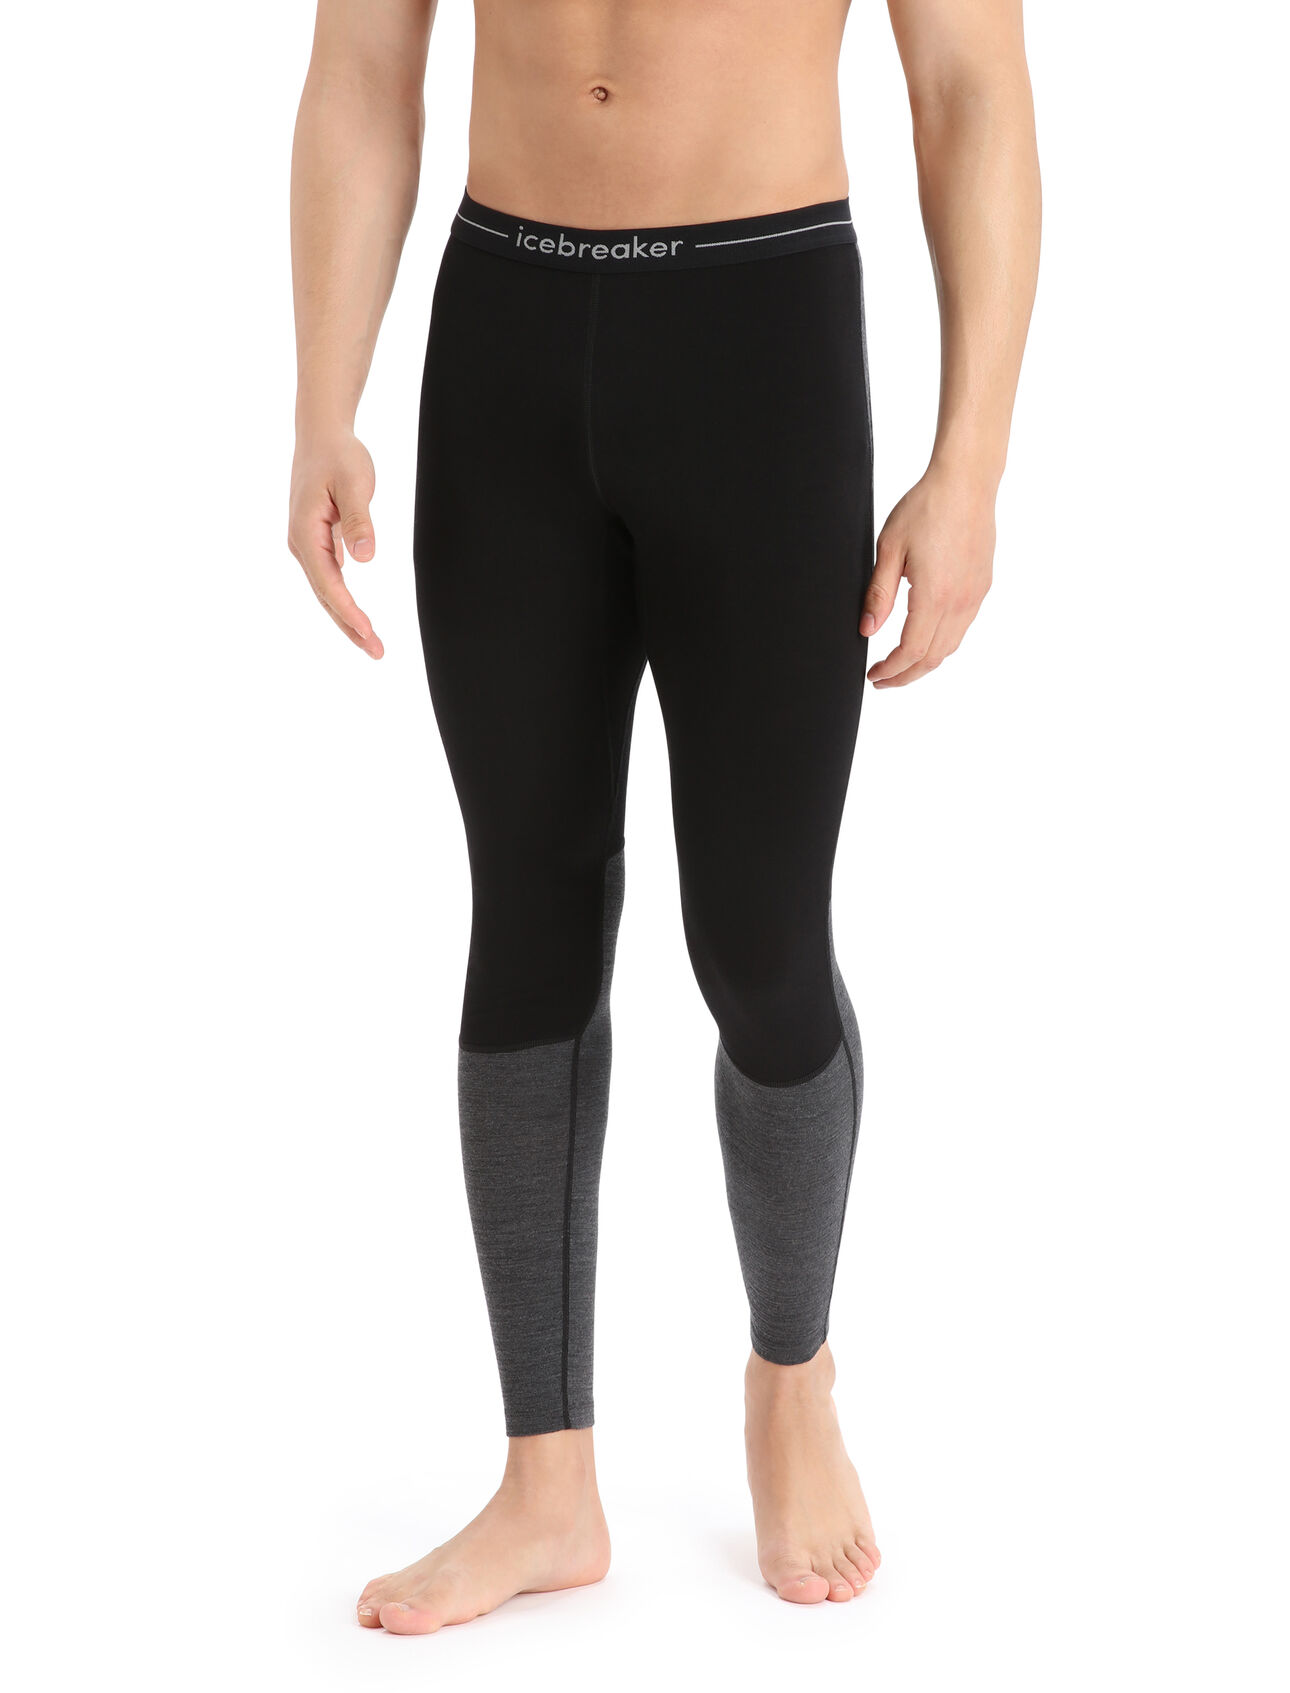 Mens 200 ZoneKnit™ Merino Thermal Leggings Midweight merino base layer bottoms designed to help regulate temperature during high-intensity activity, the 200 ZoneKnit™ Leggings feature 100% pure and natural merino wool.